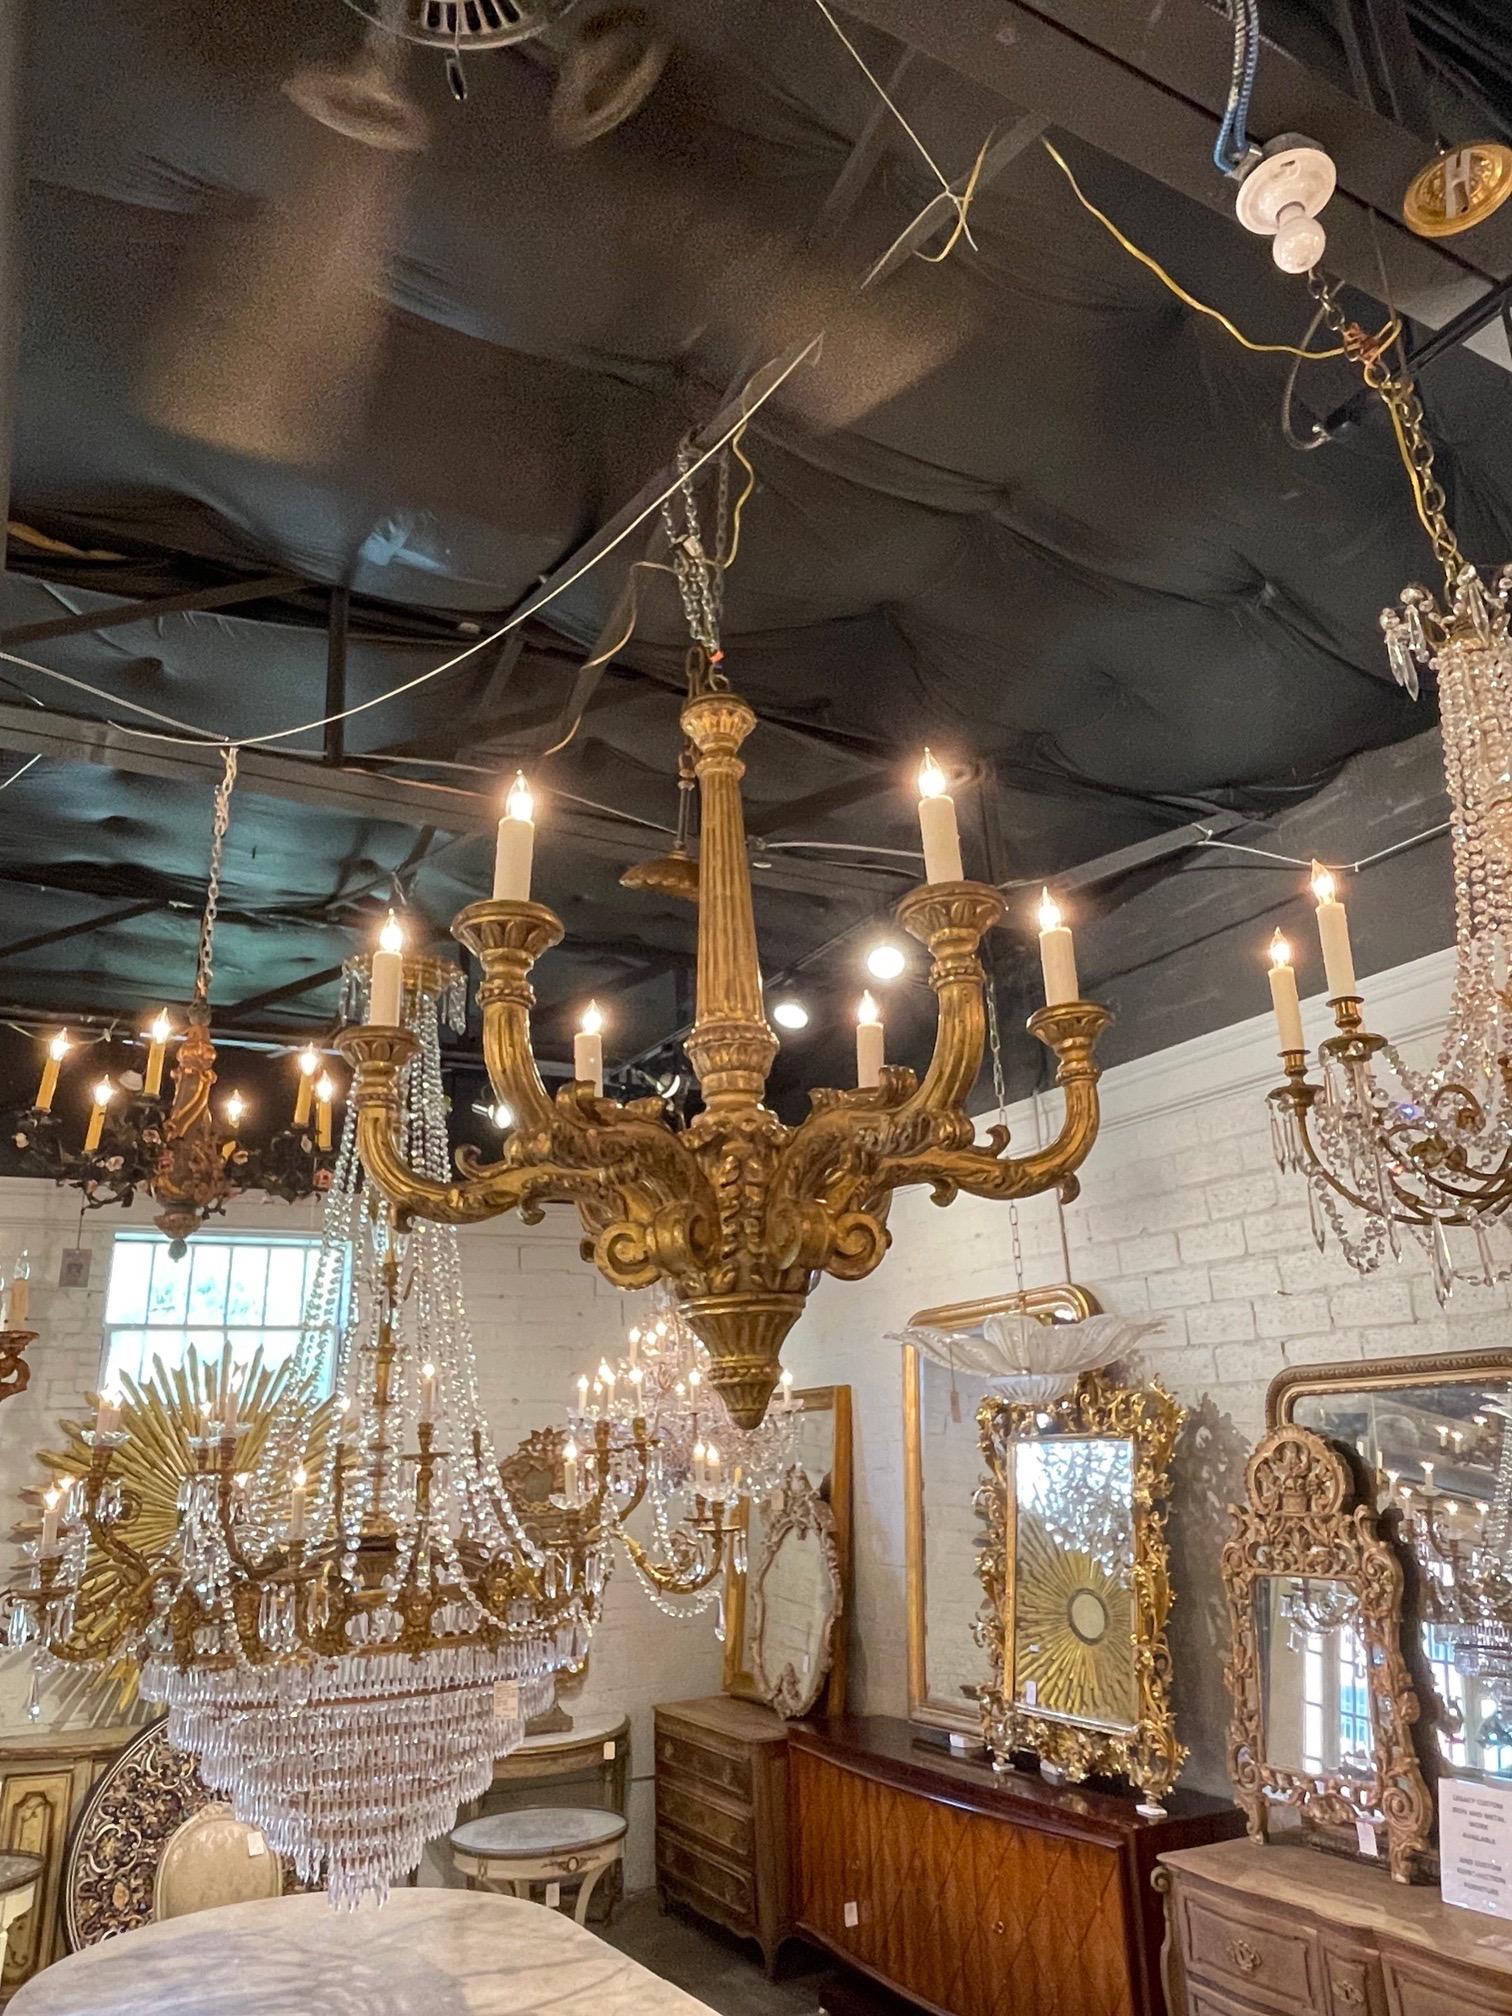 Beautiful 19th century Italian large scale carved and giltwood chandelier. The carving on this fixture are superb. Makes a very impressive statement!